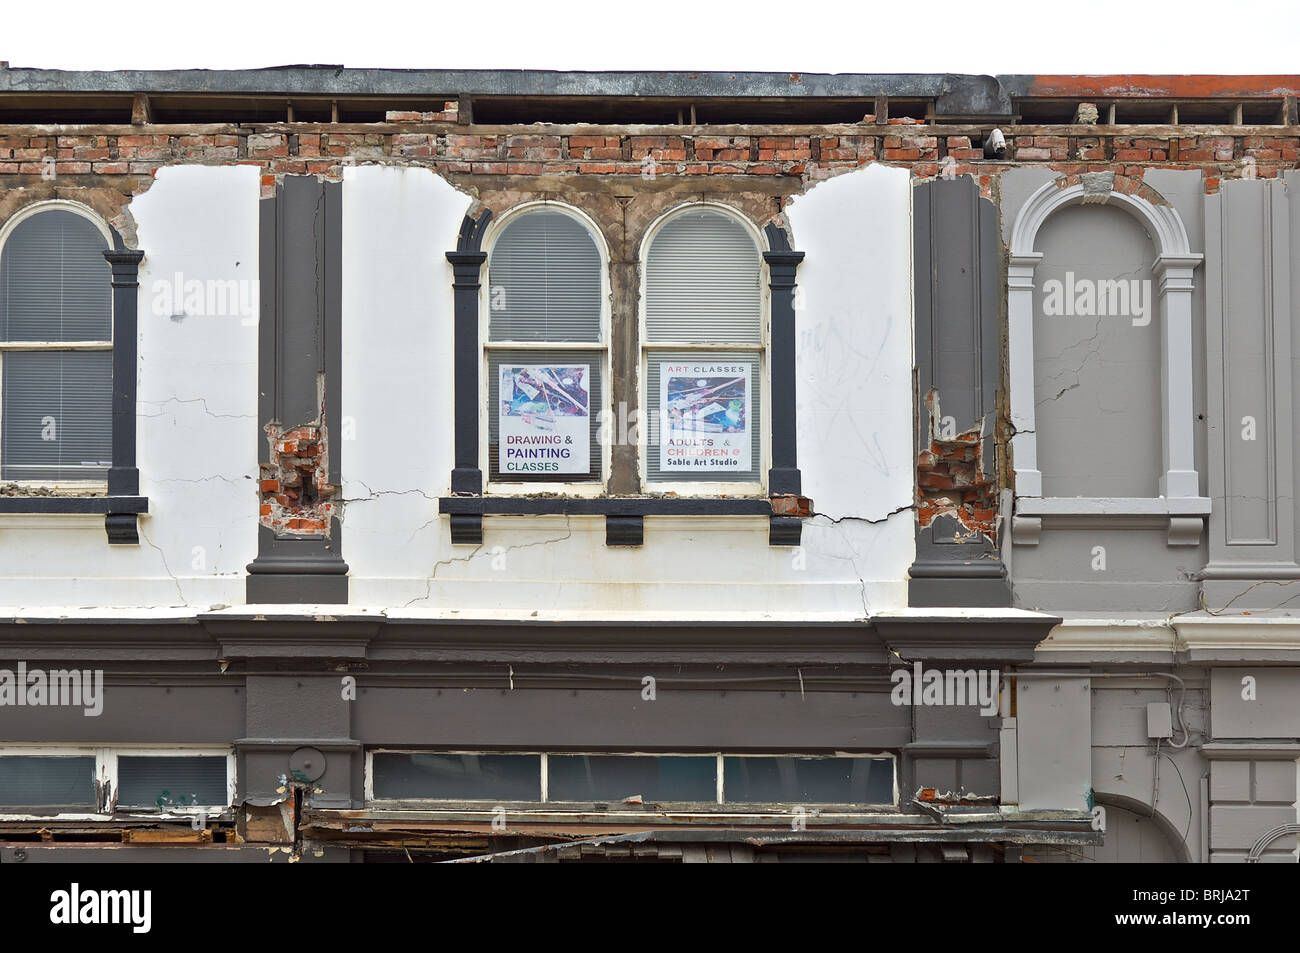 Damage caused by magnitude 7.1 earthquake, Christchurch, New Zealand,  4th September, 2010. Stock Photo